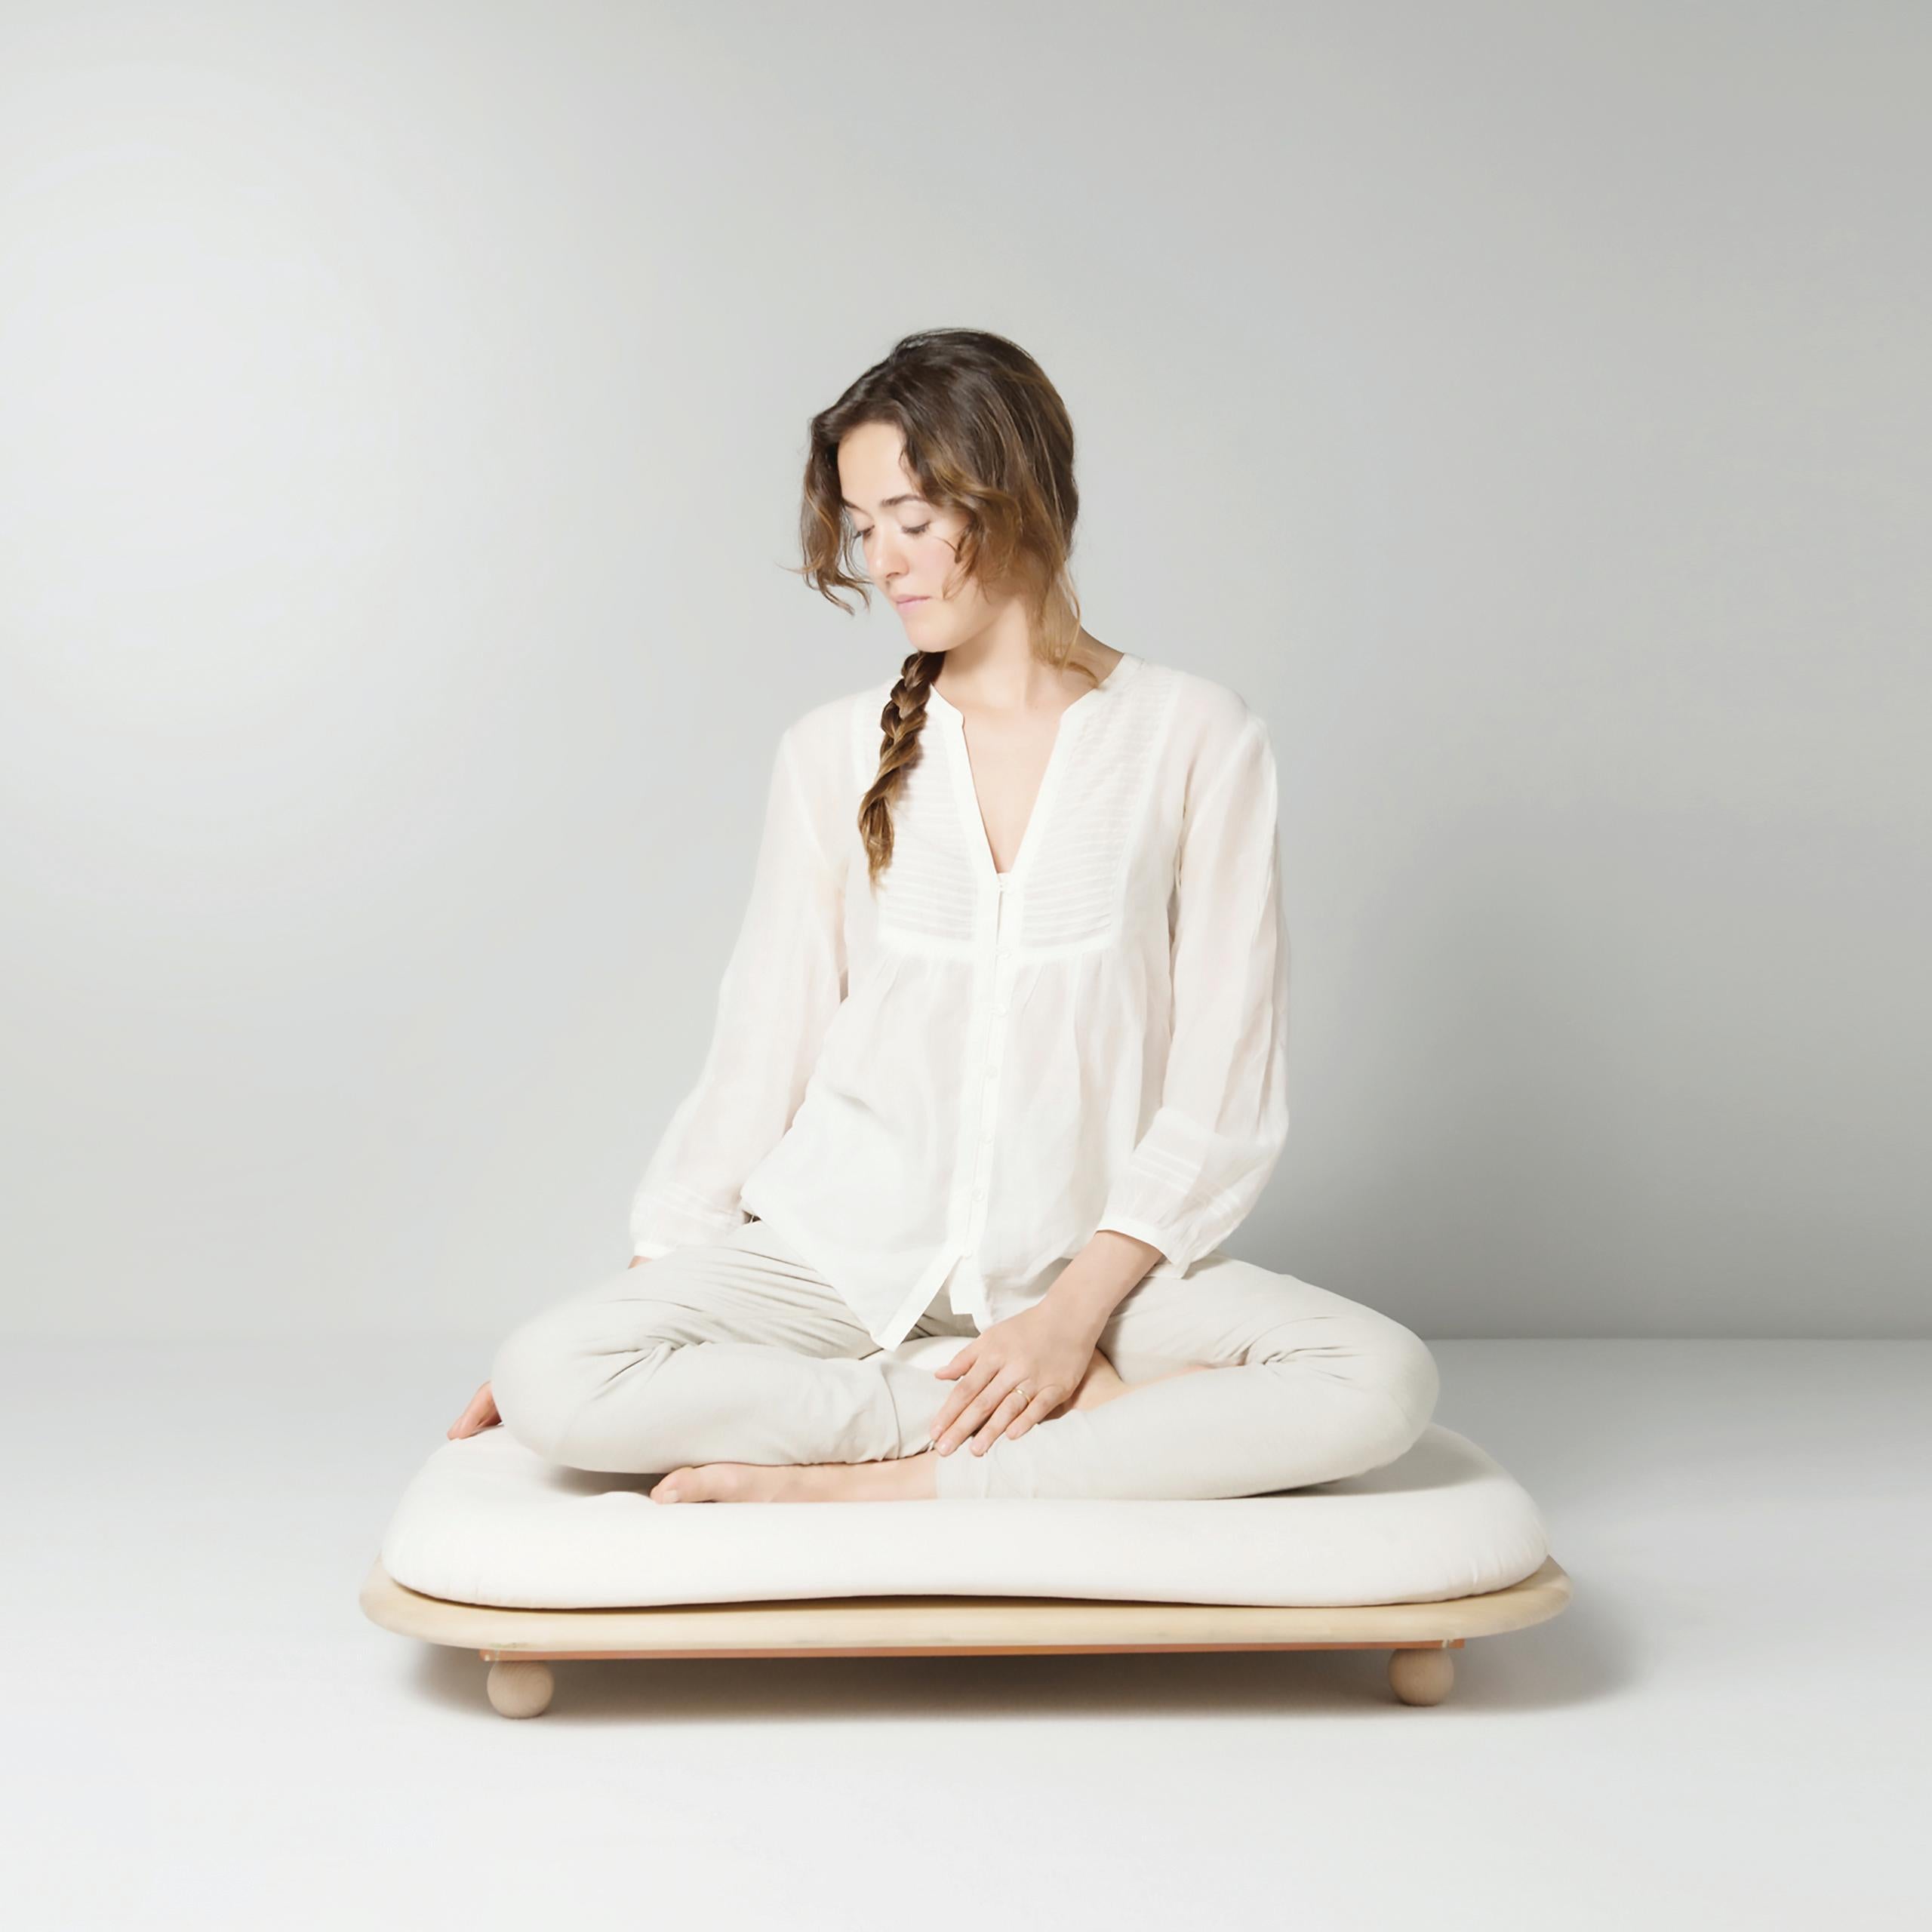 The ASANA is a floor seat with an aim to take us closer to the earth and facilitate physical and mental balance. In the sanskritic yoga tradition asana means “the posture that brings comfort and steadiness”.
Customisation is a main aspect of the